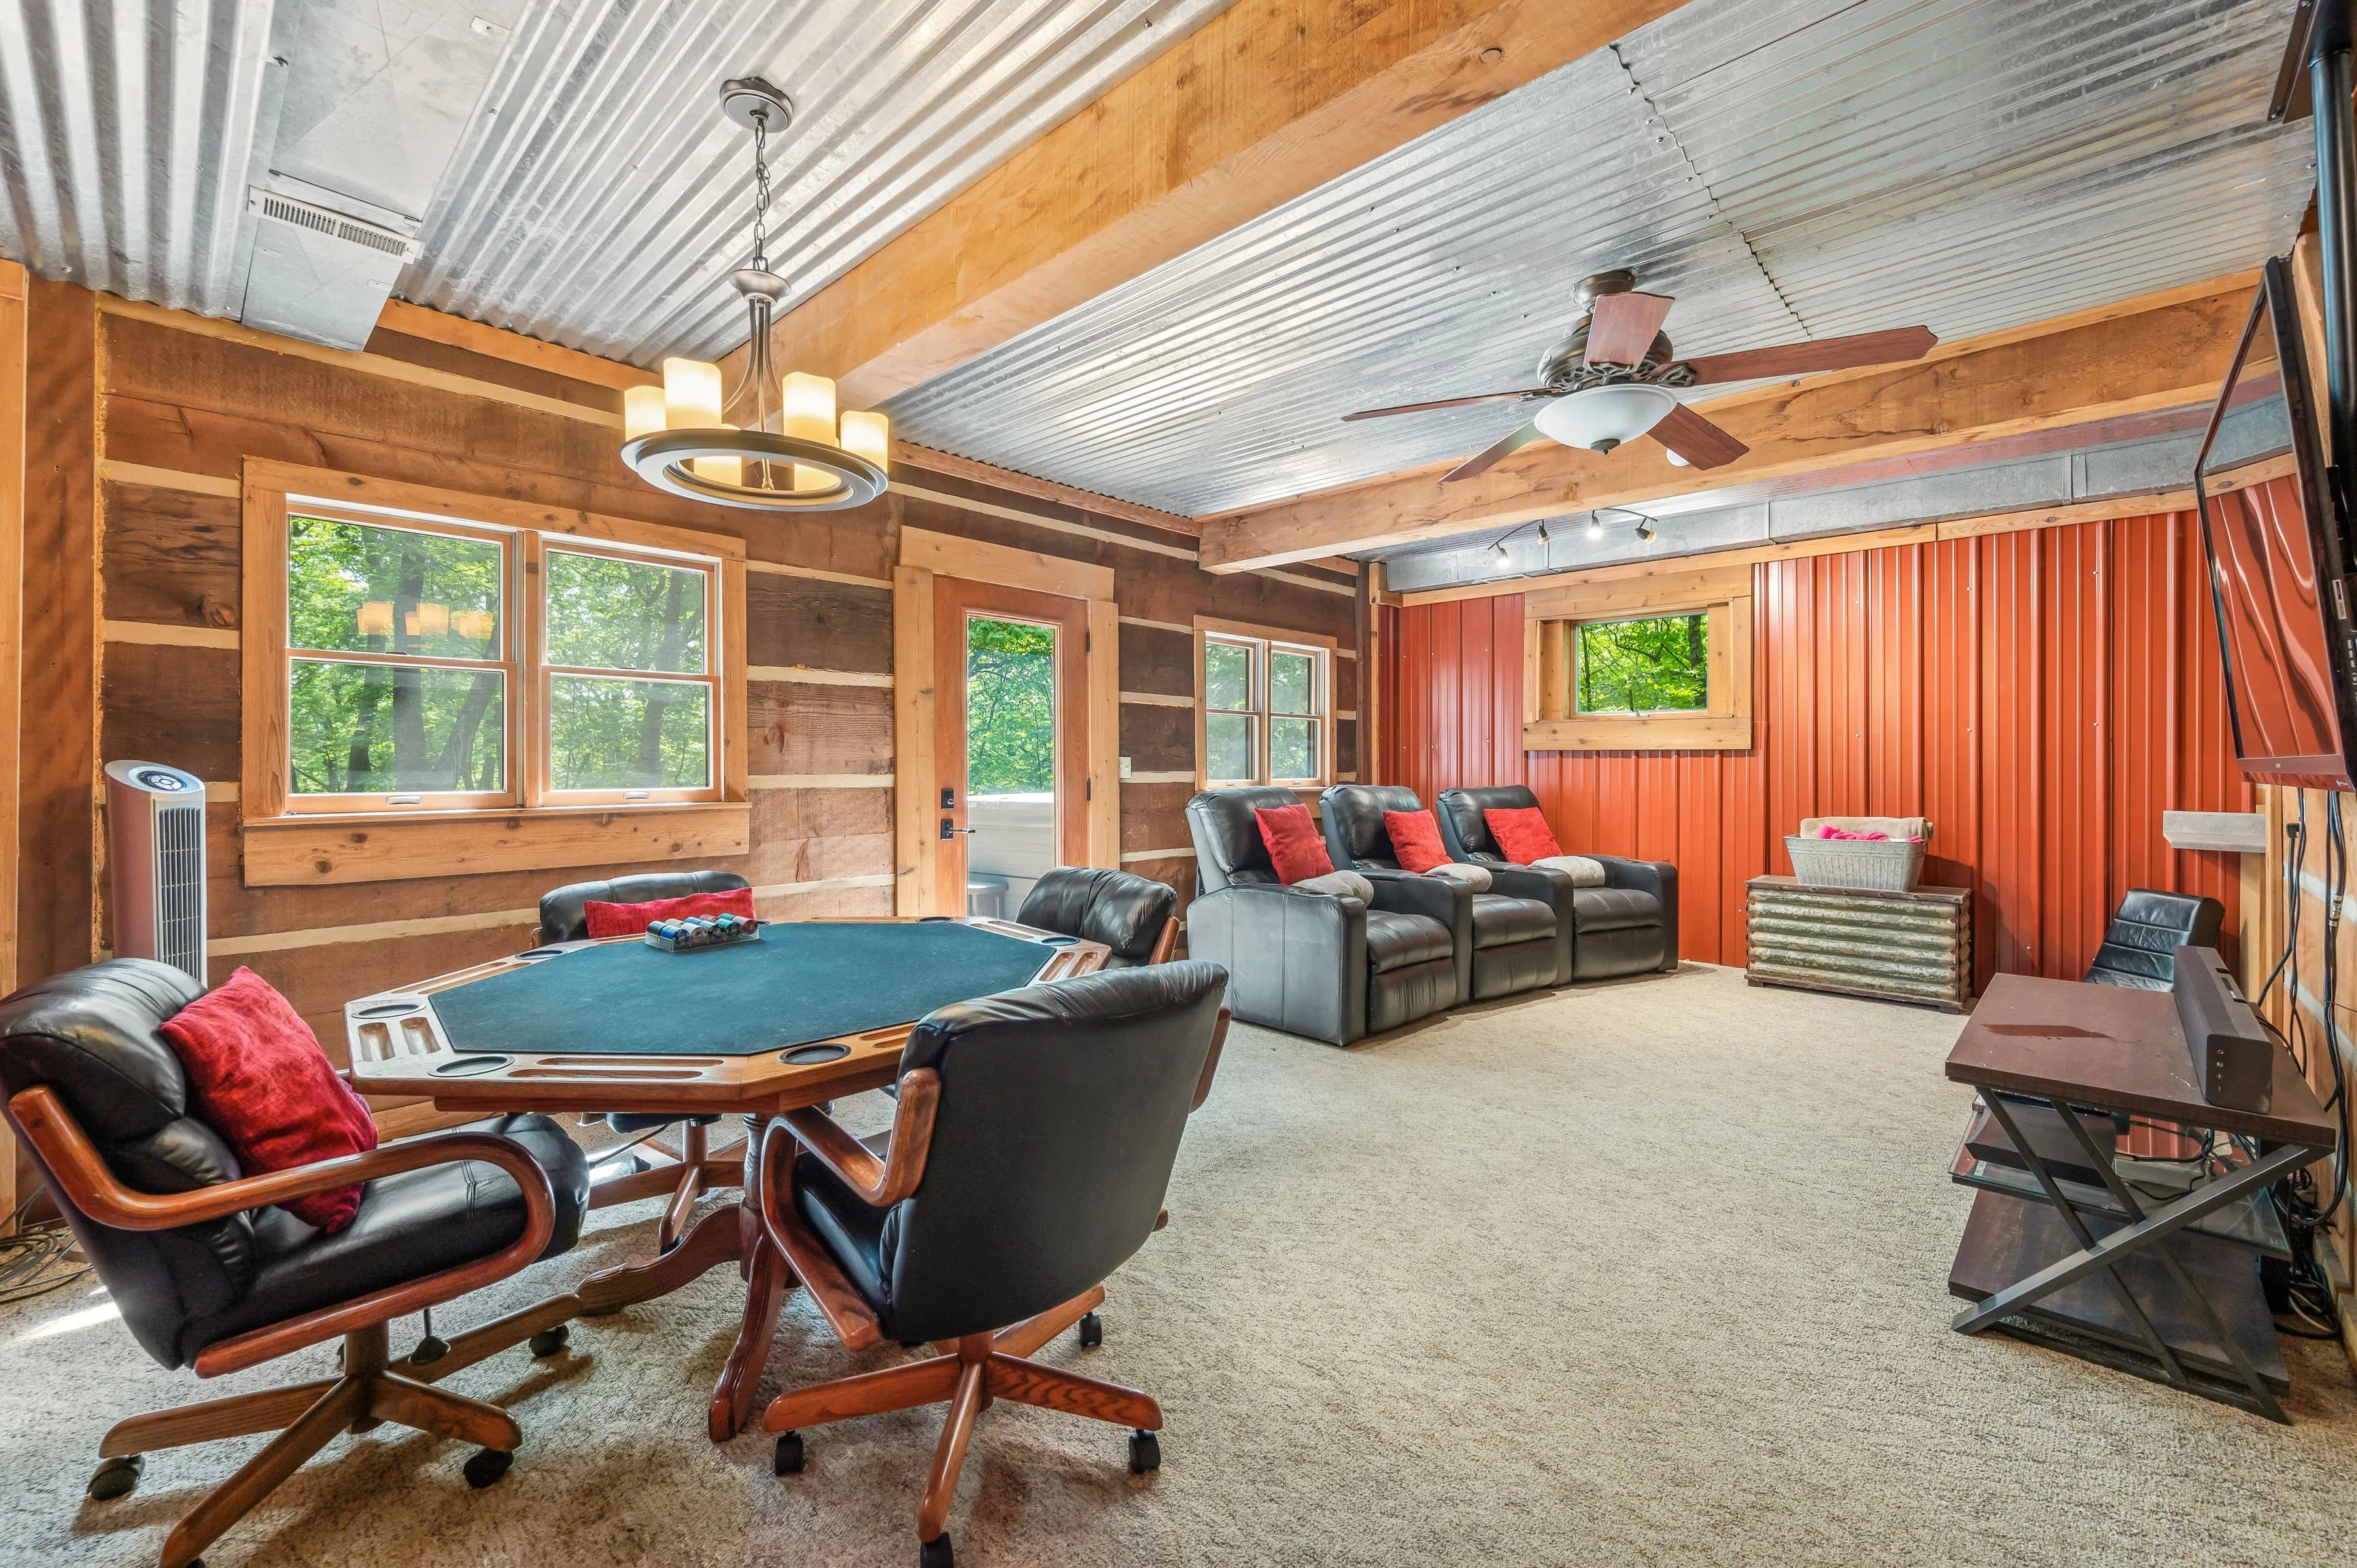 Cozy rustic game room with poker table, leather reclining chairs, corrugated metal ceiling, and wooden walls.